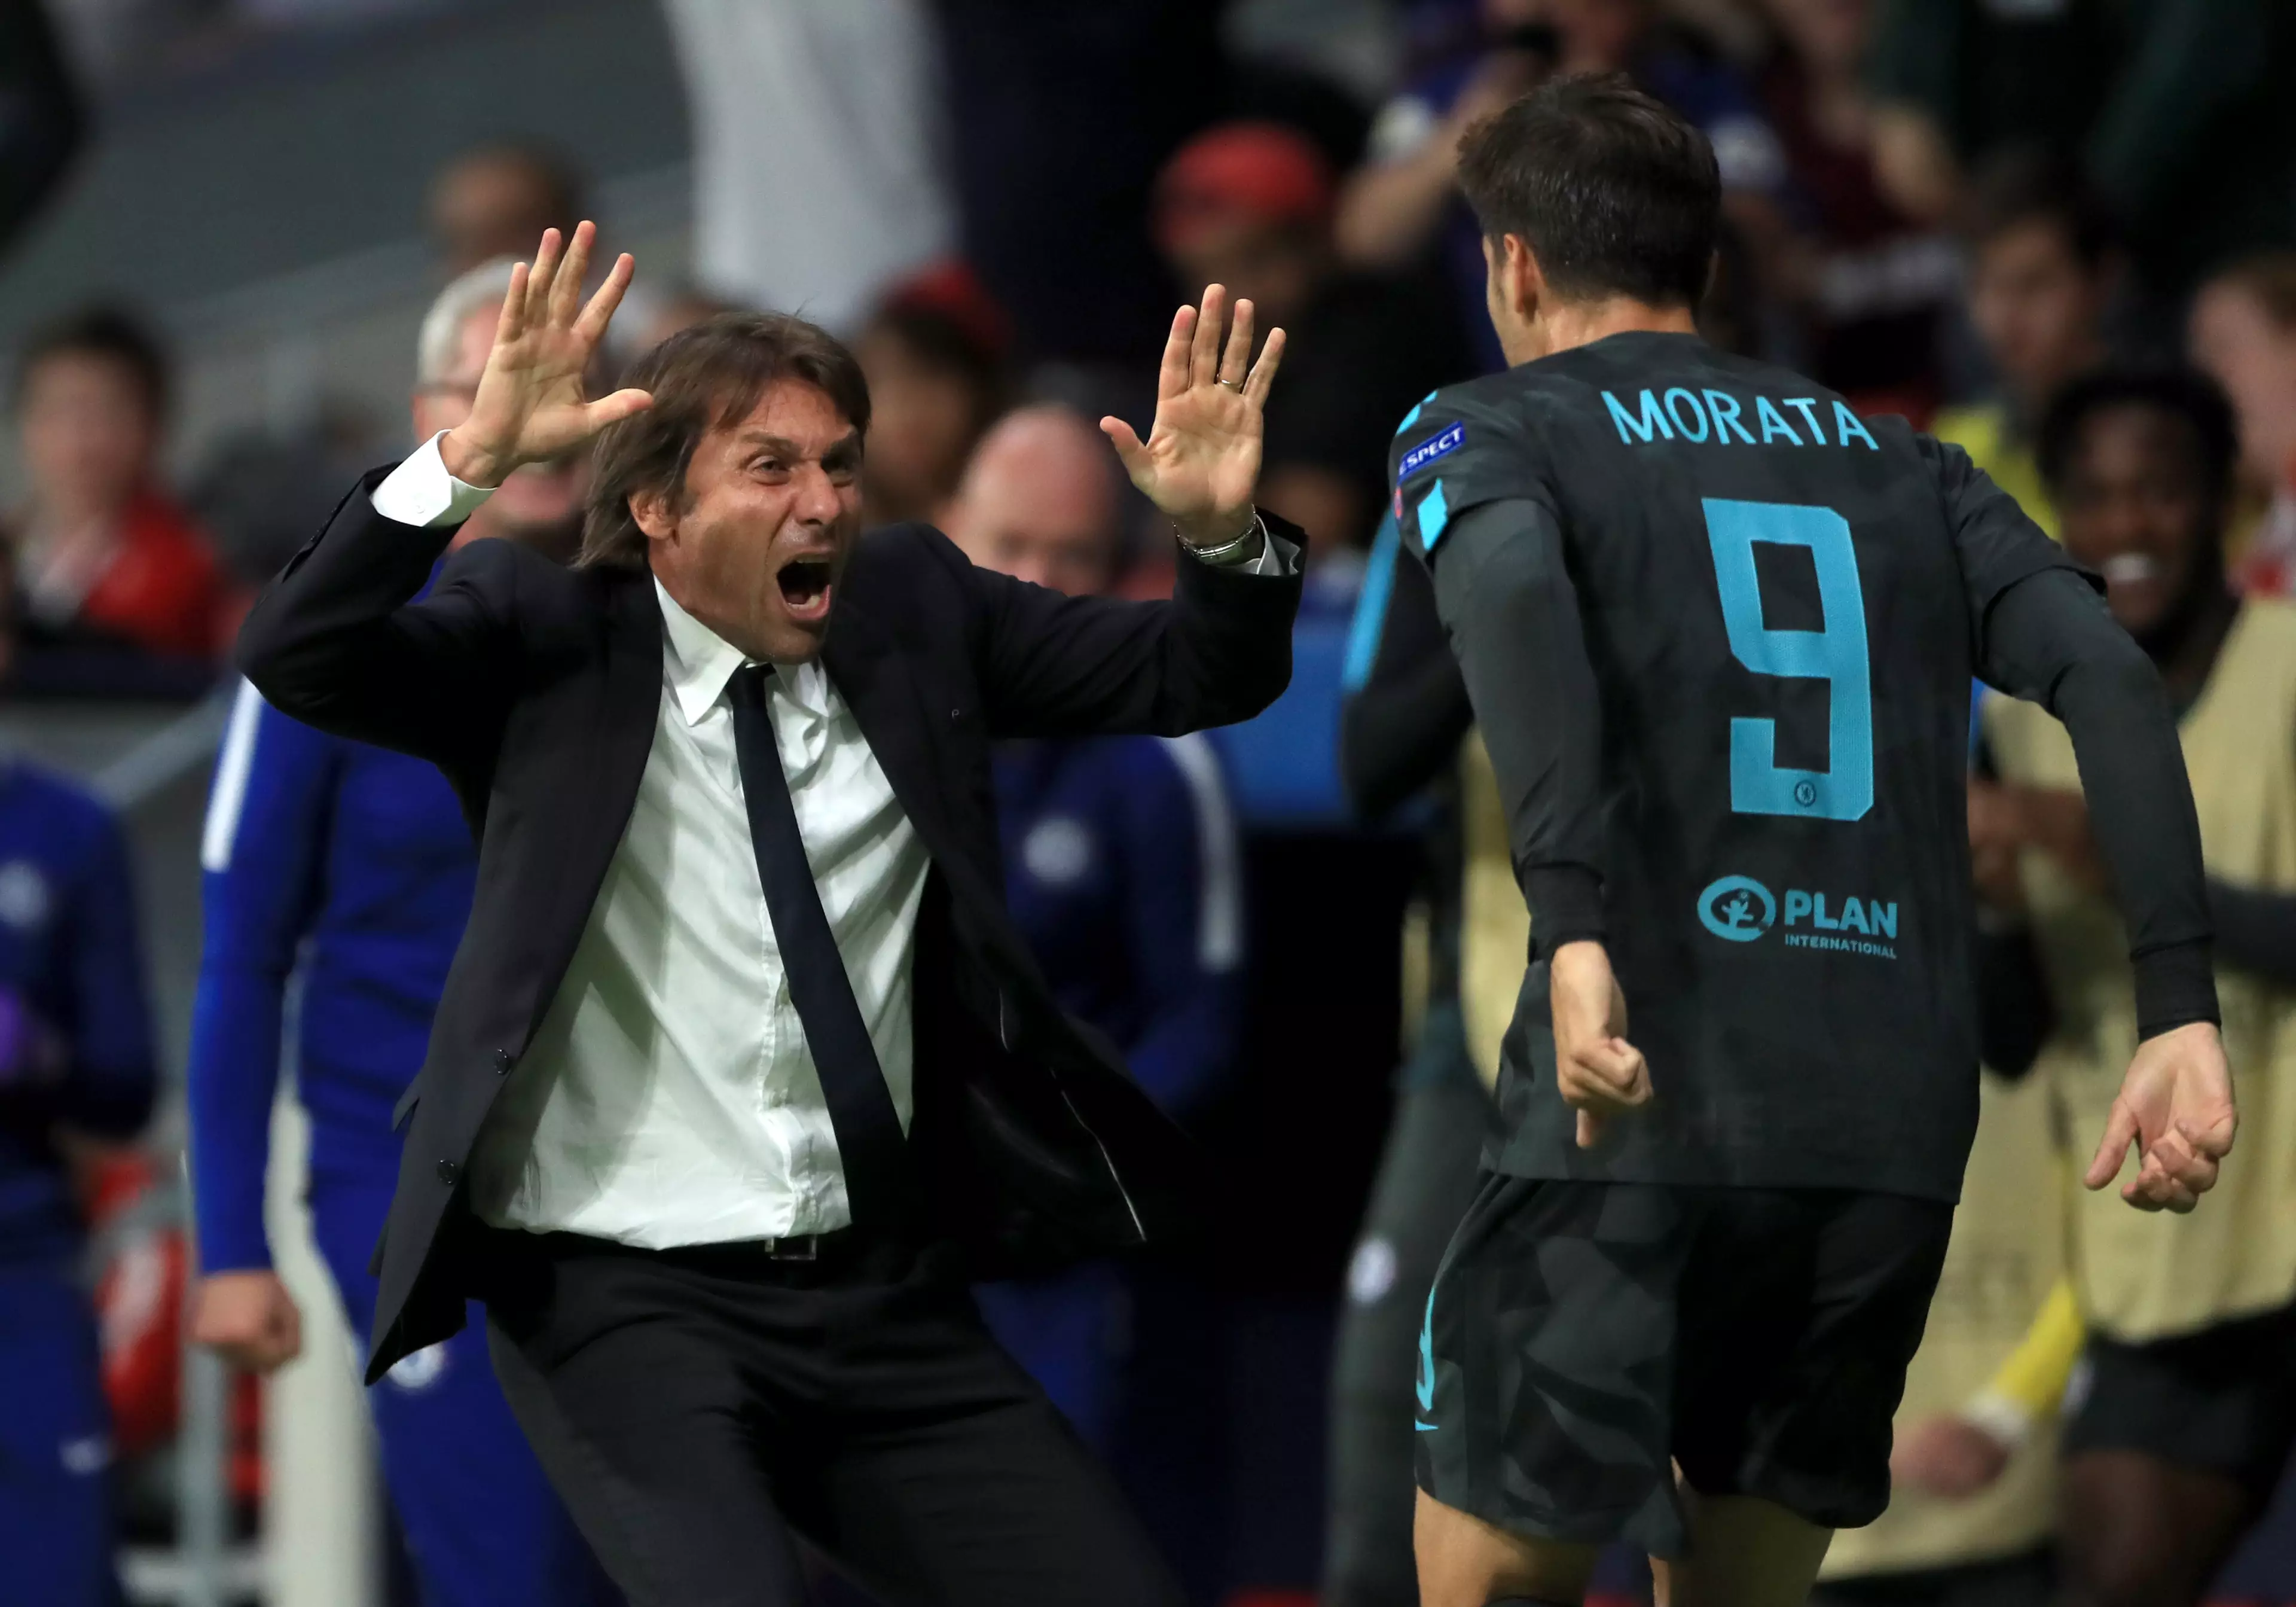 Conte signed Morata after missing out on Lukaku. Image: PA Images